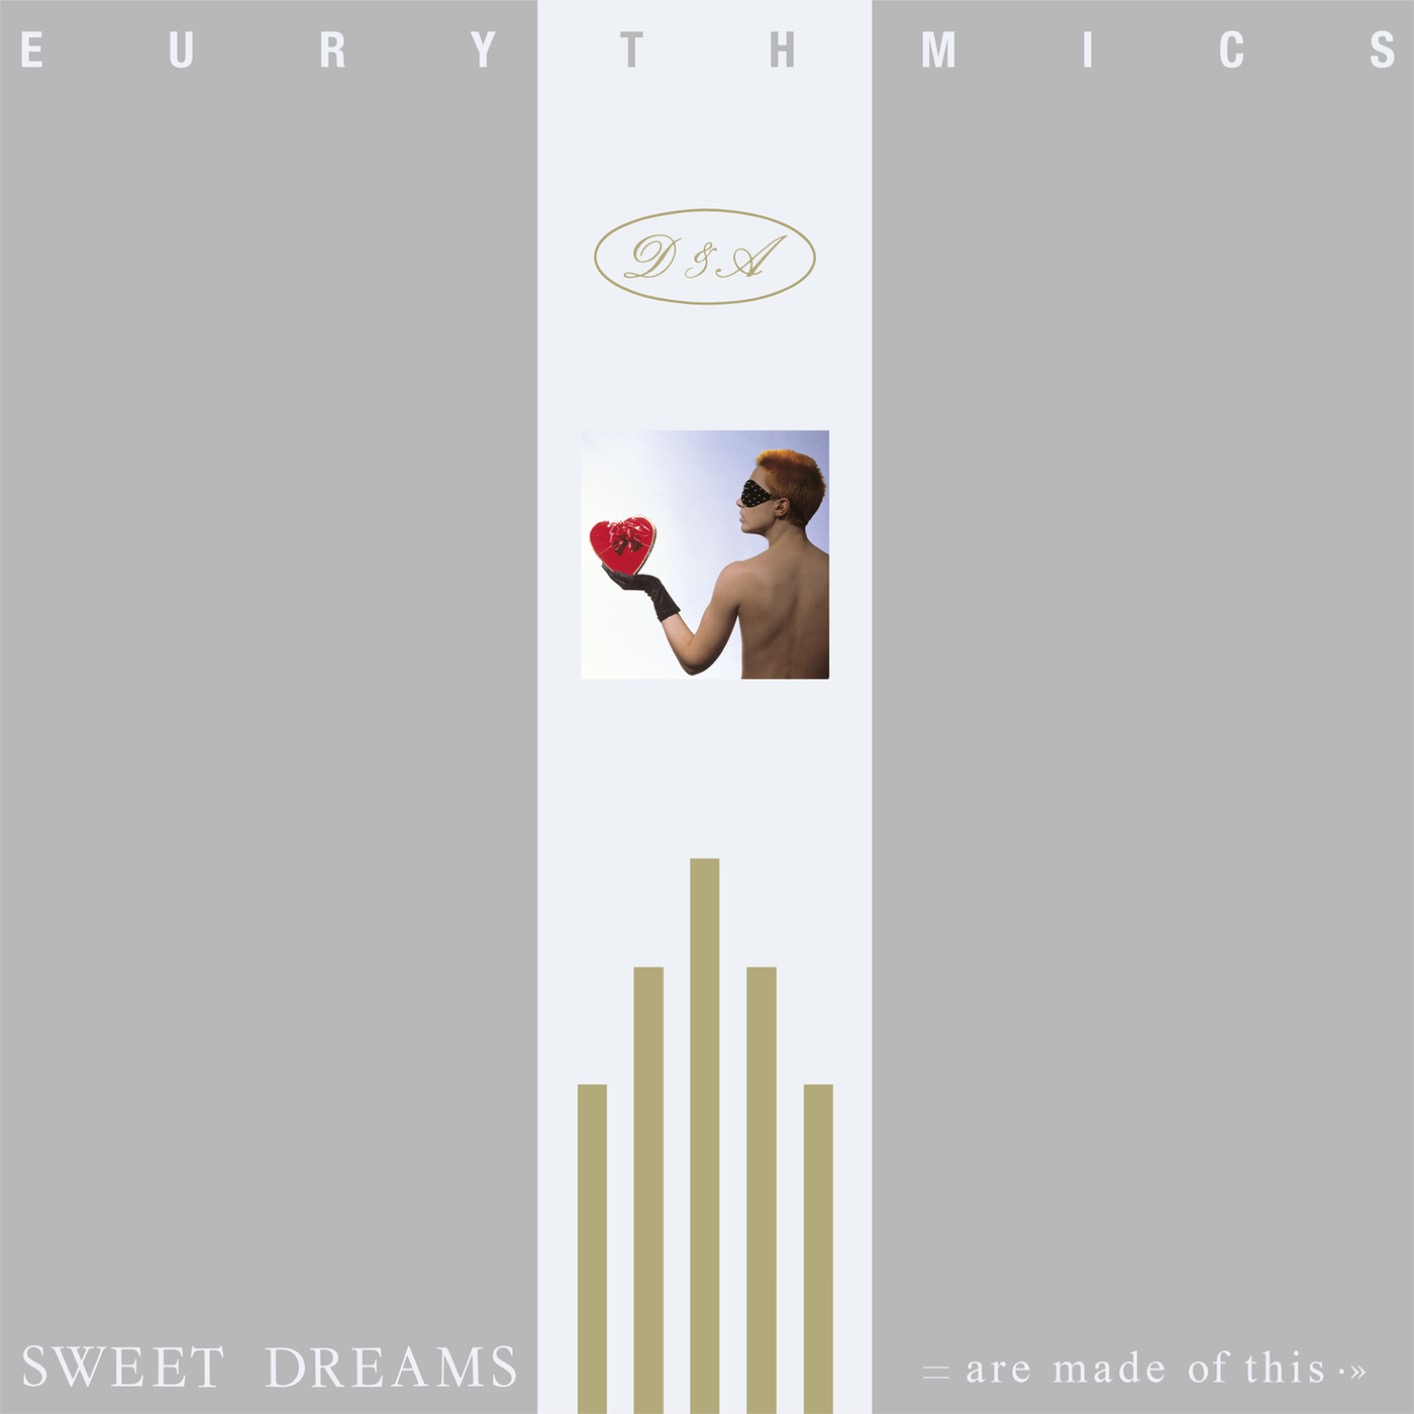 Eurythmics – Sweet Dreams (Are Made of This) (1984/2018) [FLAC 24bit/96kHz]